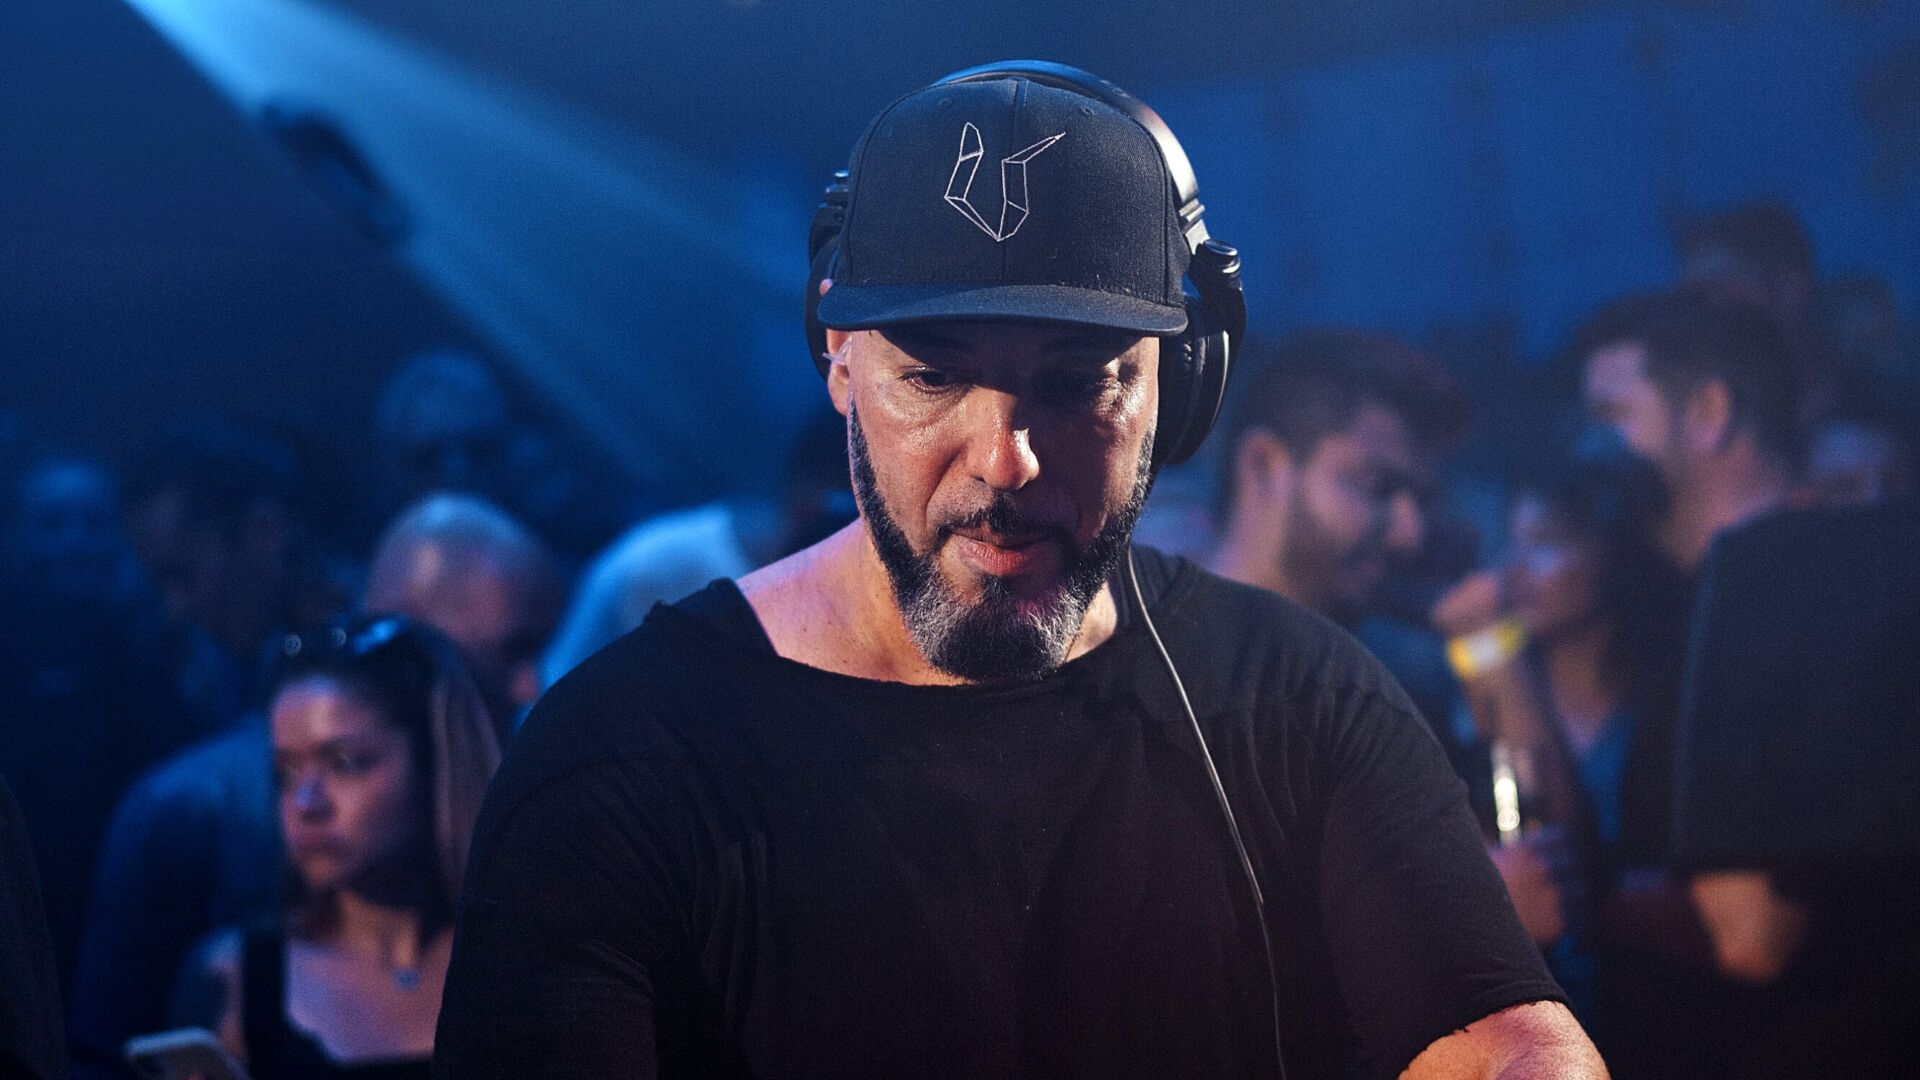 Roger Sanchez Returns To Pacha Ibiza For The Grand Opening Weekend